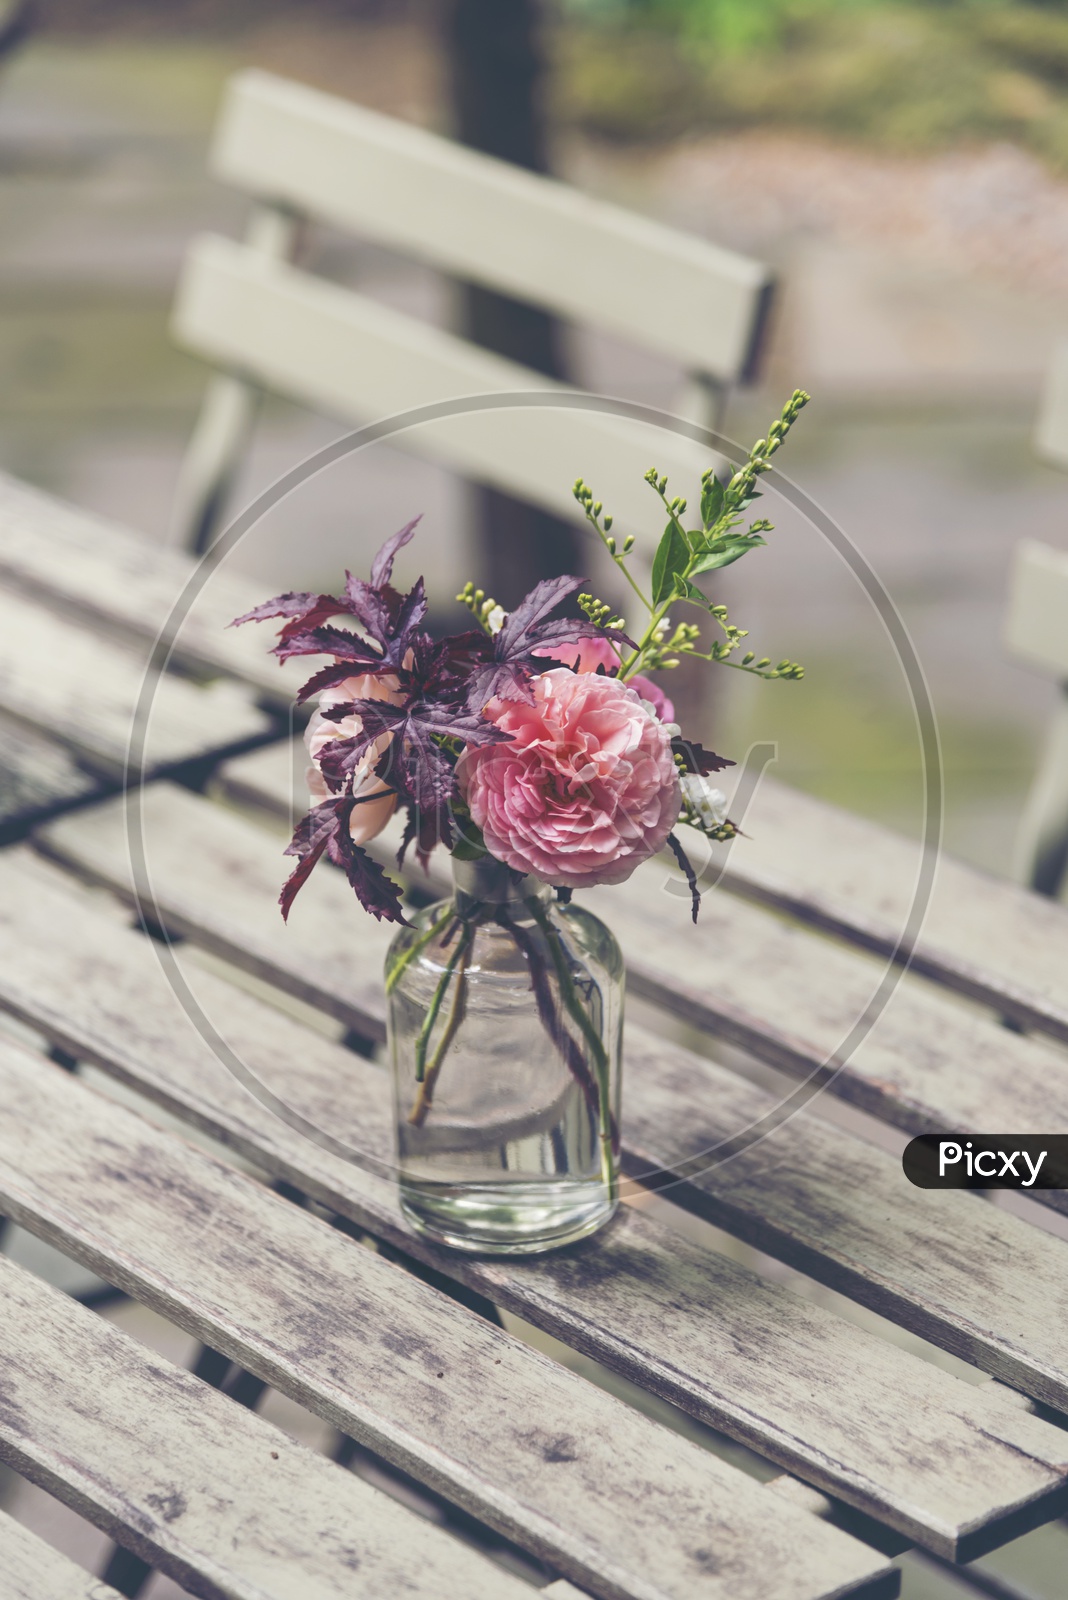 Beautiful Flowers In a Vase On an Wooden Table